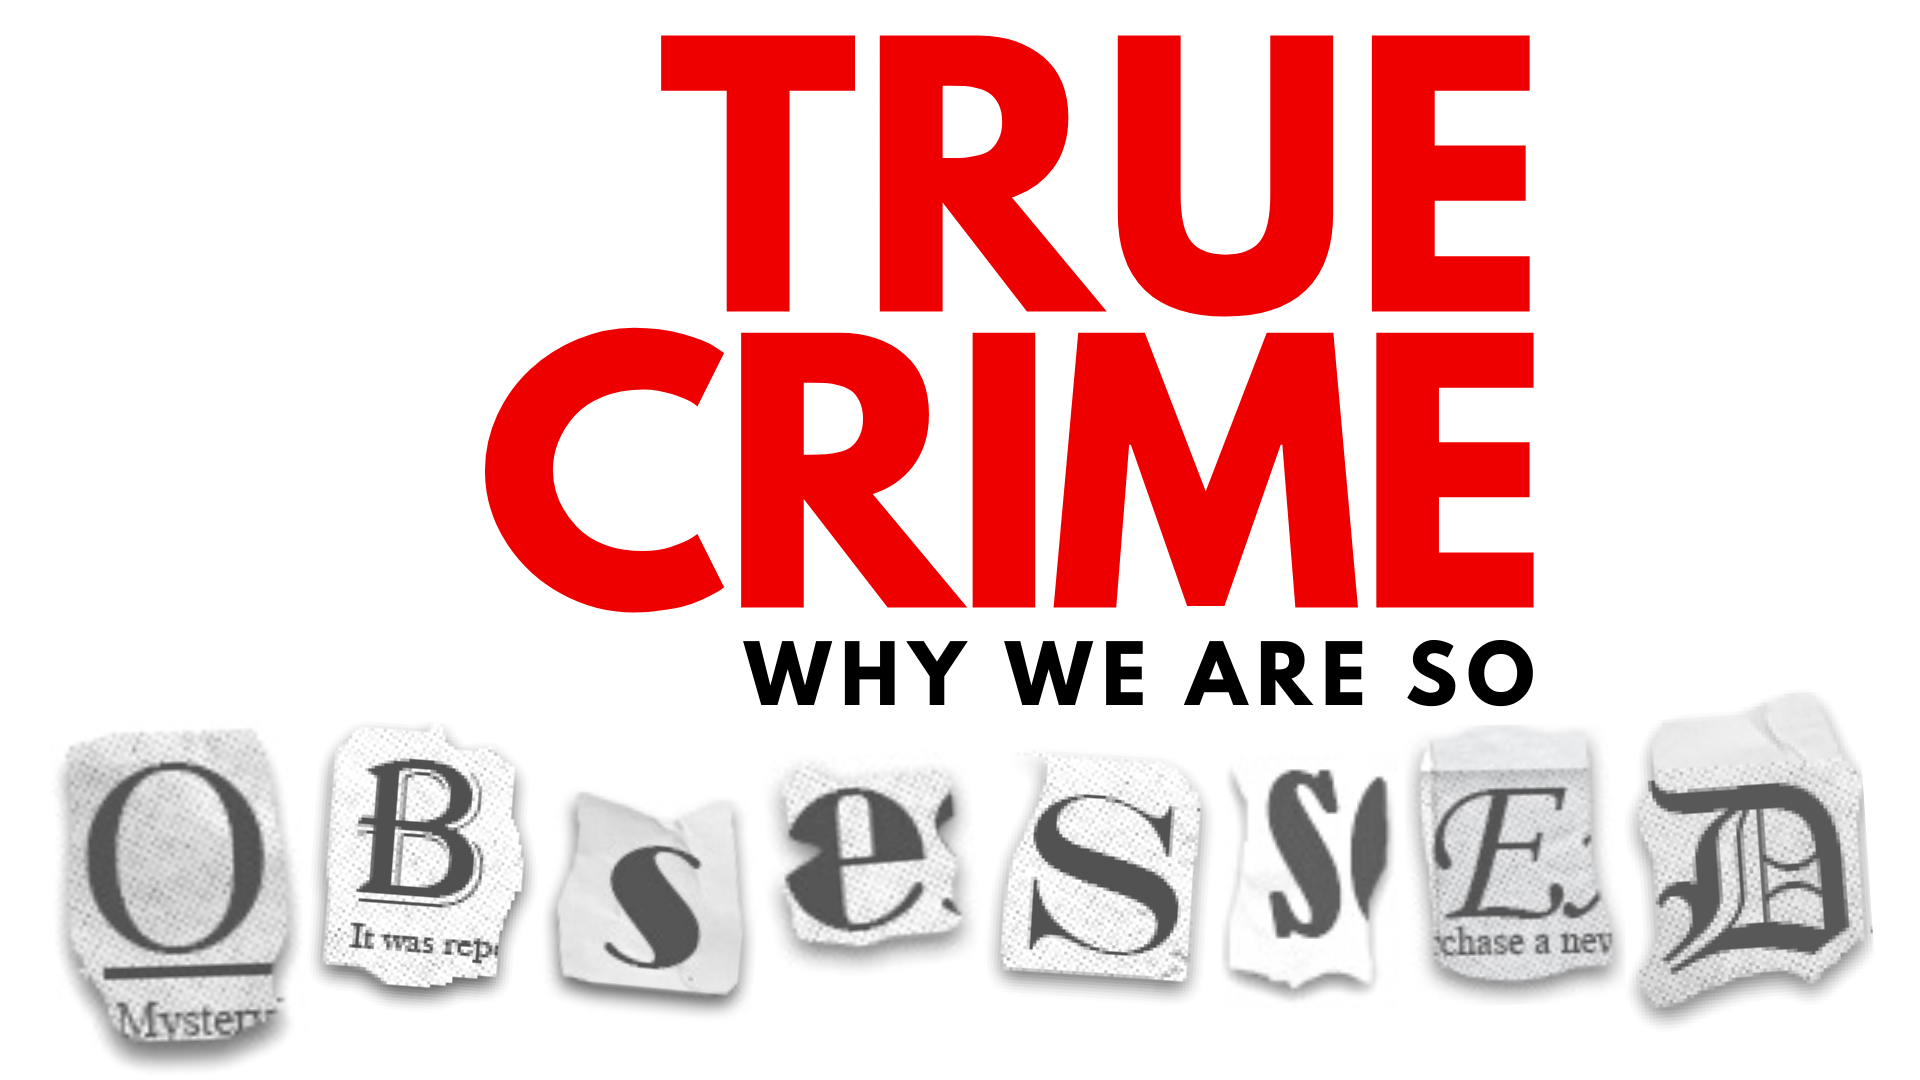 Event Promo Photo For True Crime: Why We Are So Obsessed